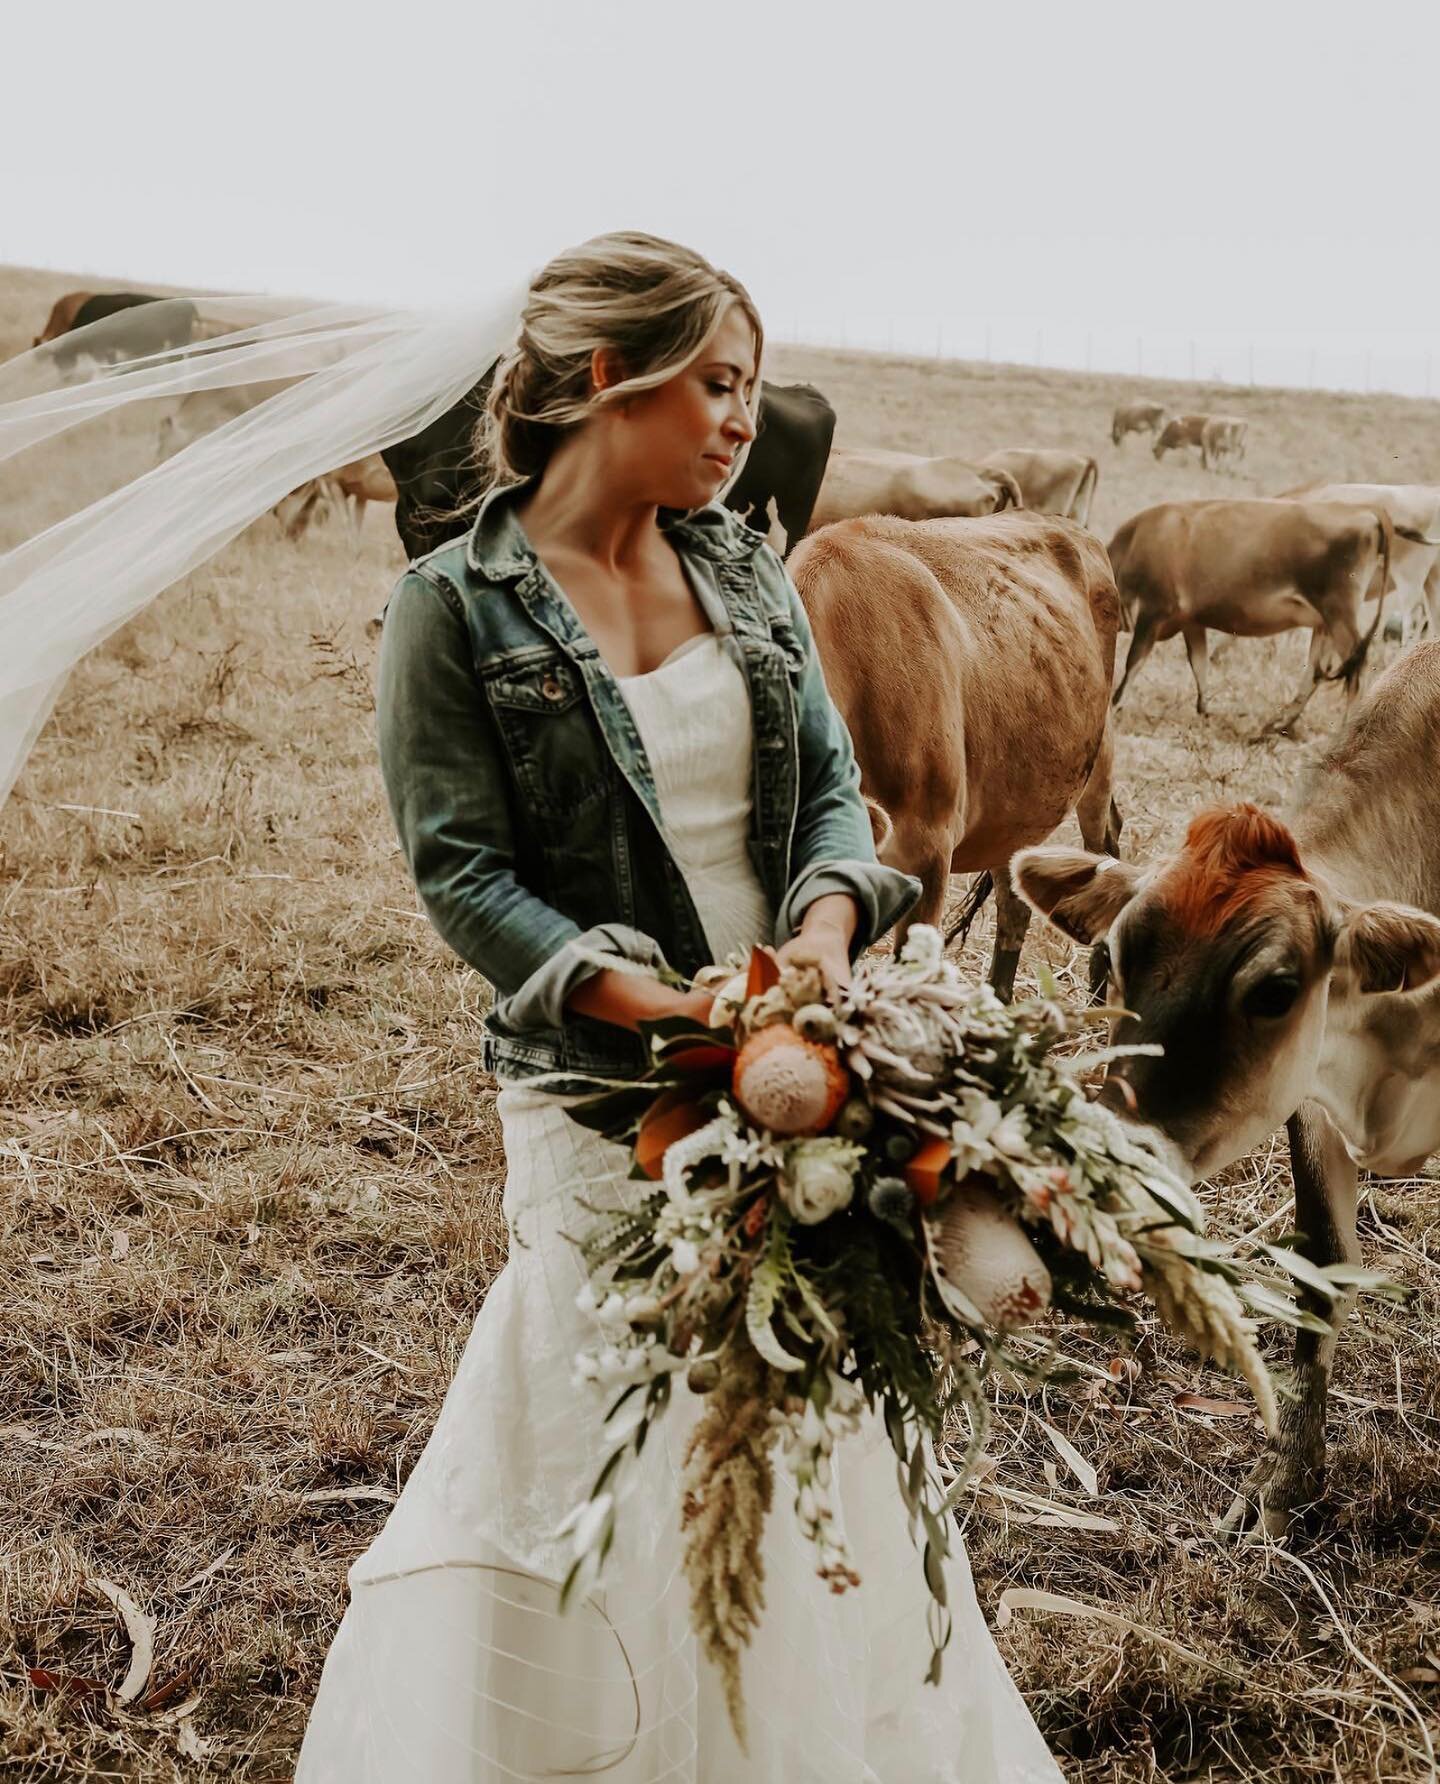 Experience the countryside of love at the #SpringHillEstate. 💛

Photo: @ashleegreenphotography
Makeup: @labellasoulartistry
Bride: @emma.byrne.rider
Flowers: @californiasister
.
.
.
.
#springhillweddings #caliweddings #countrywedding #weddingphotogr